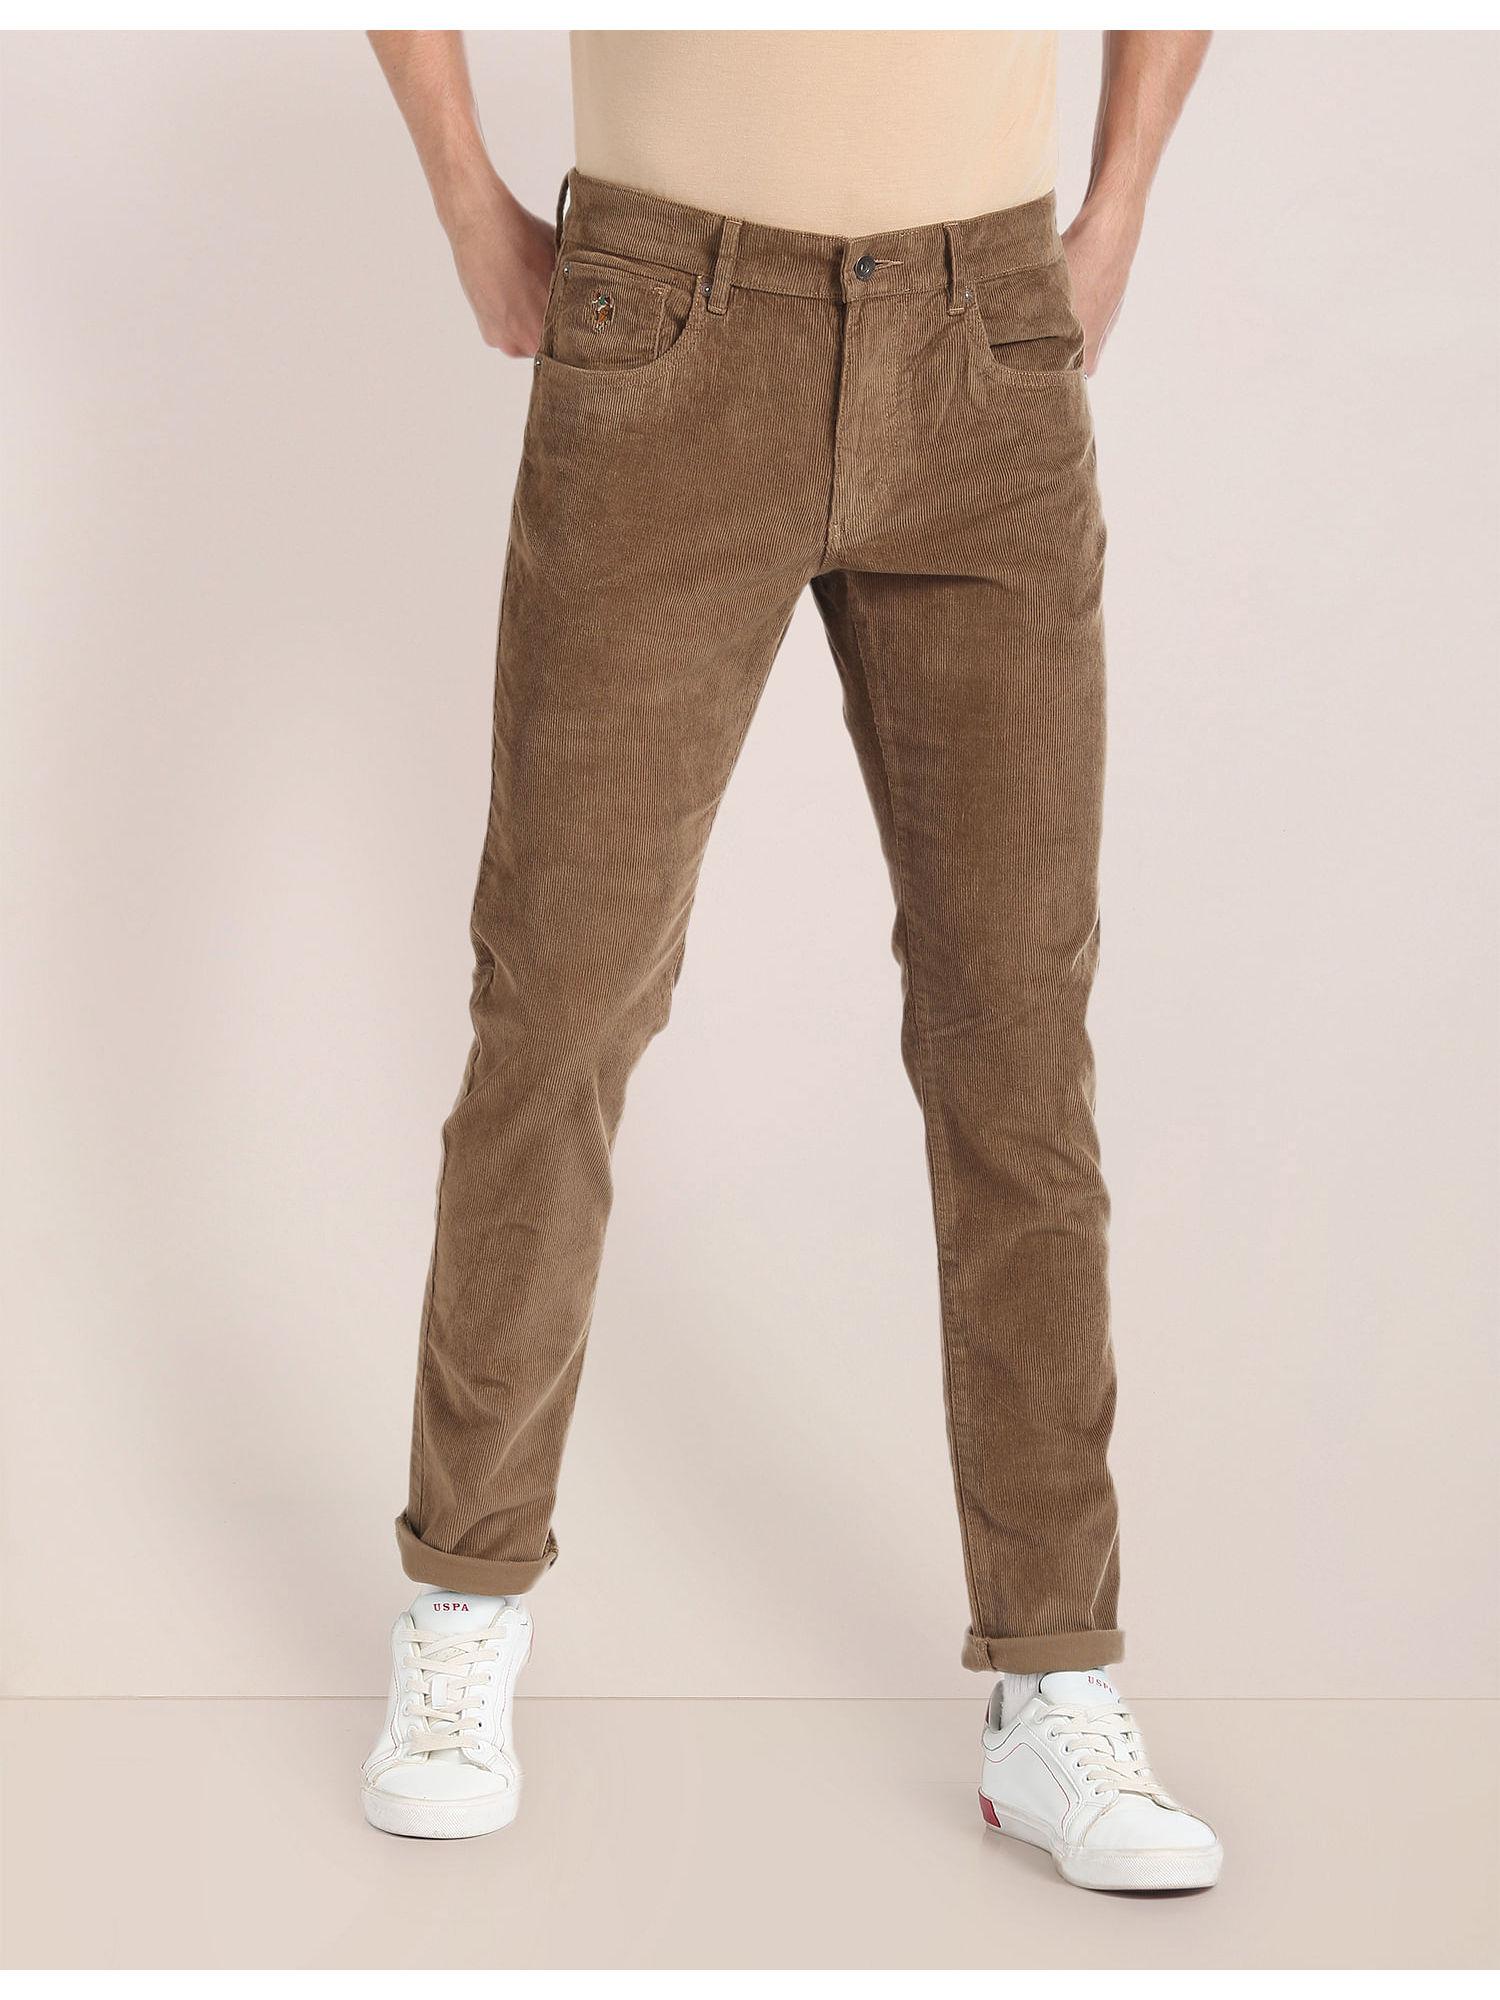 brown flat front corduroy casual trousers